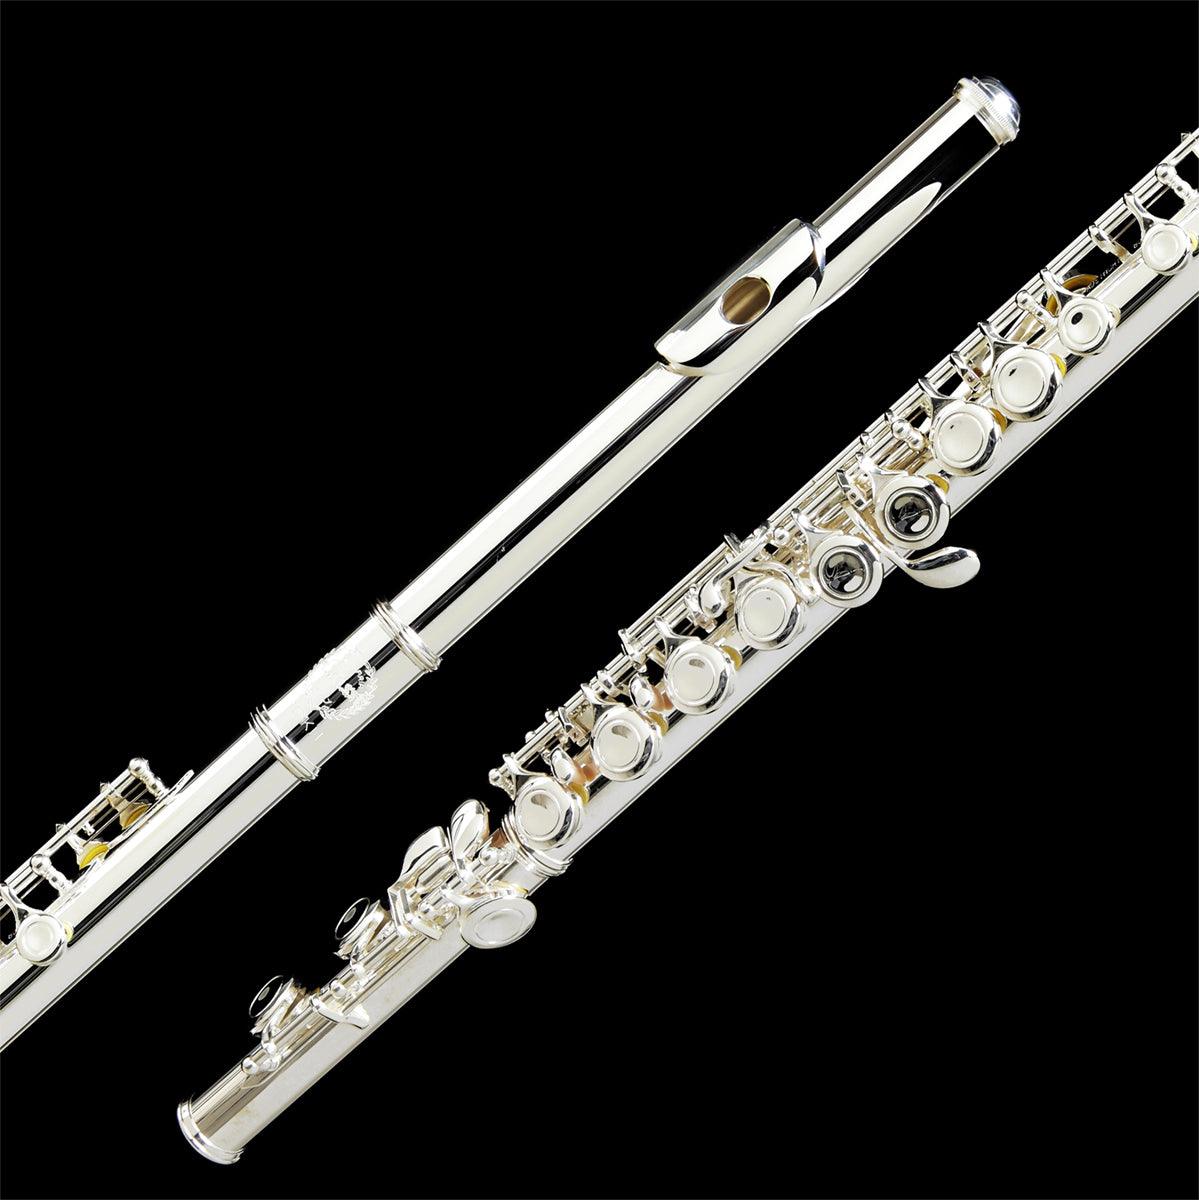 Grassi GR710MKII Flute Closed Keys G Offset Split E Mechanism W/Case - Orchestral - Woodwind Section by Grassi at Muso's Stuff